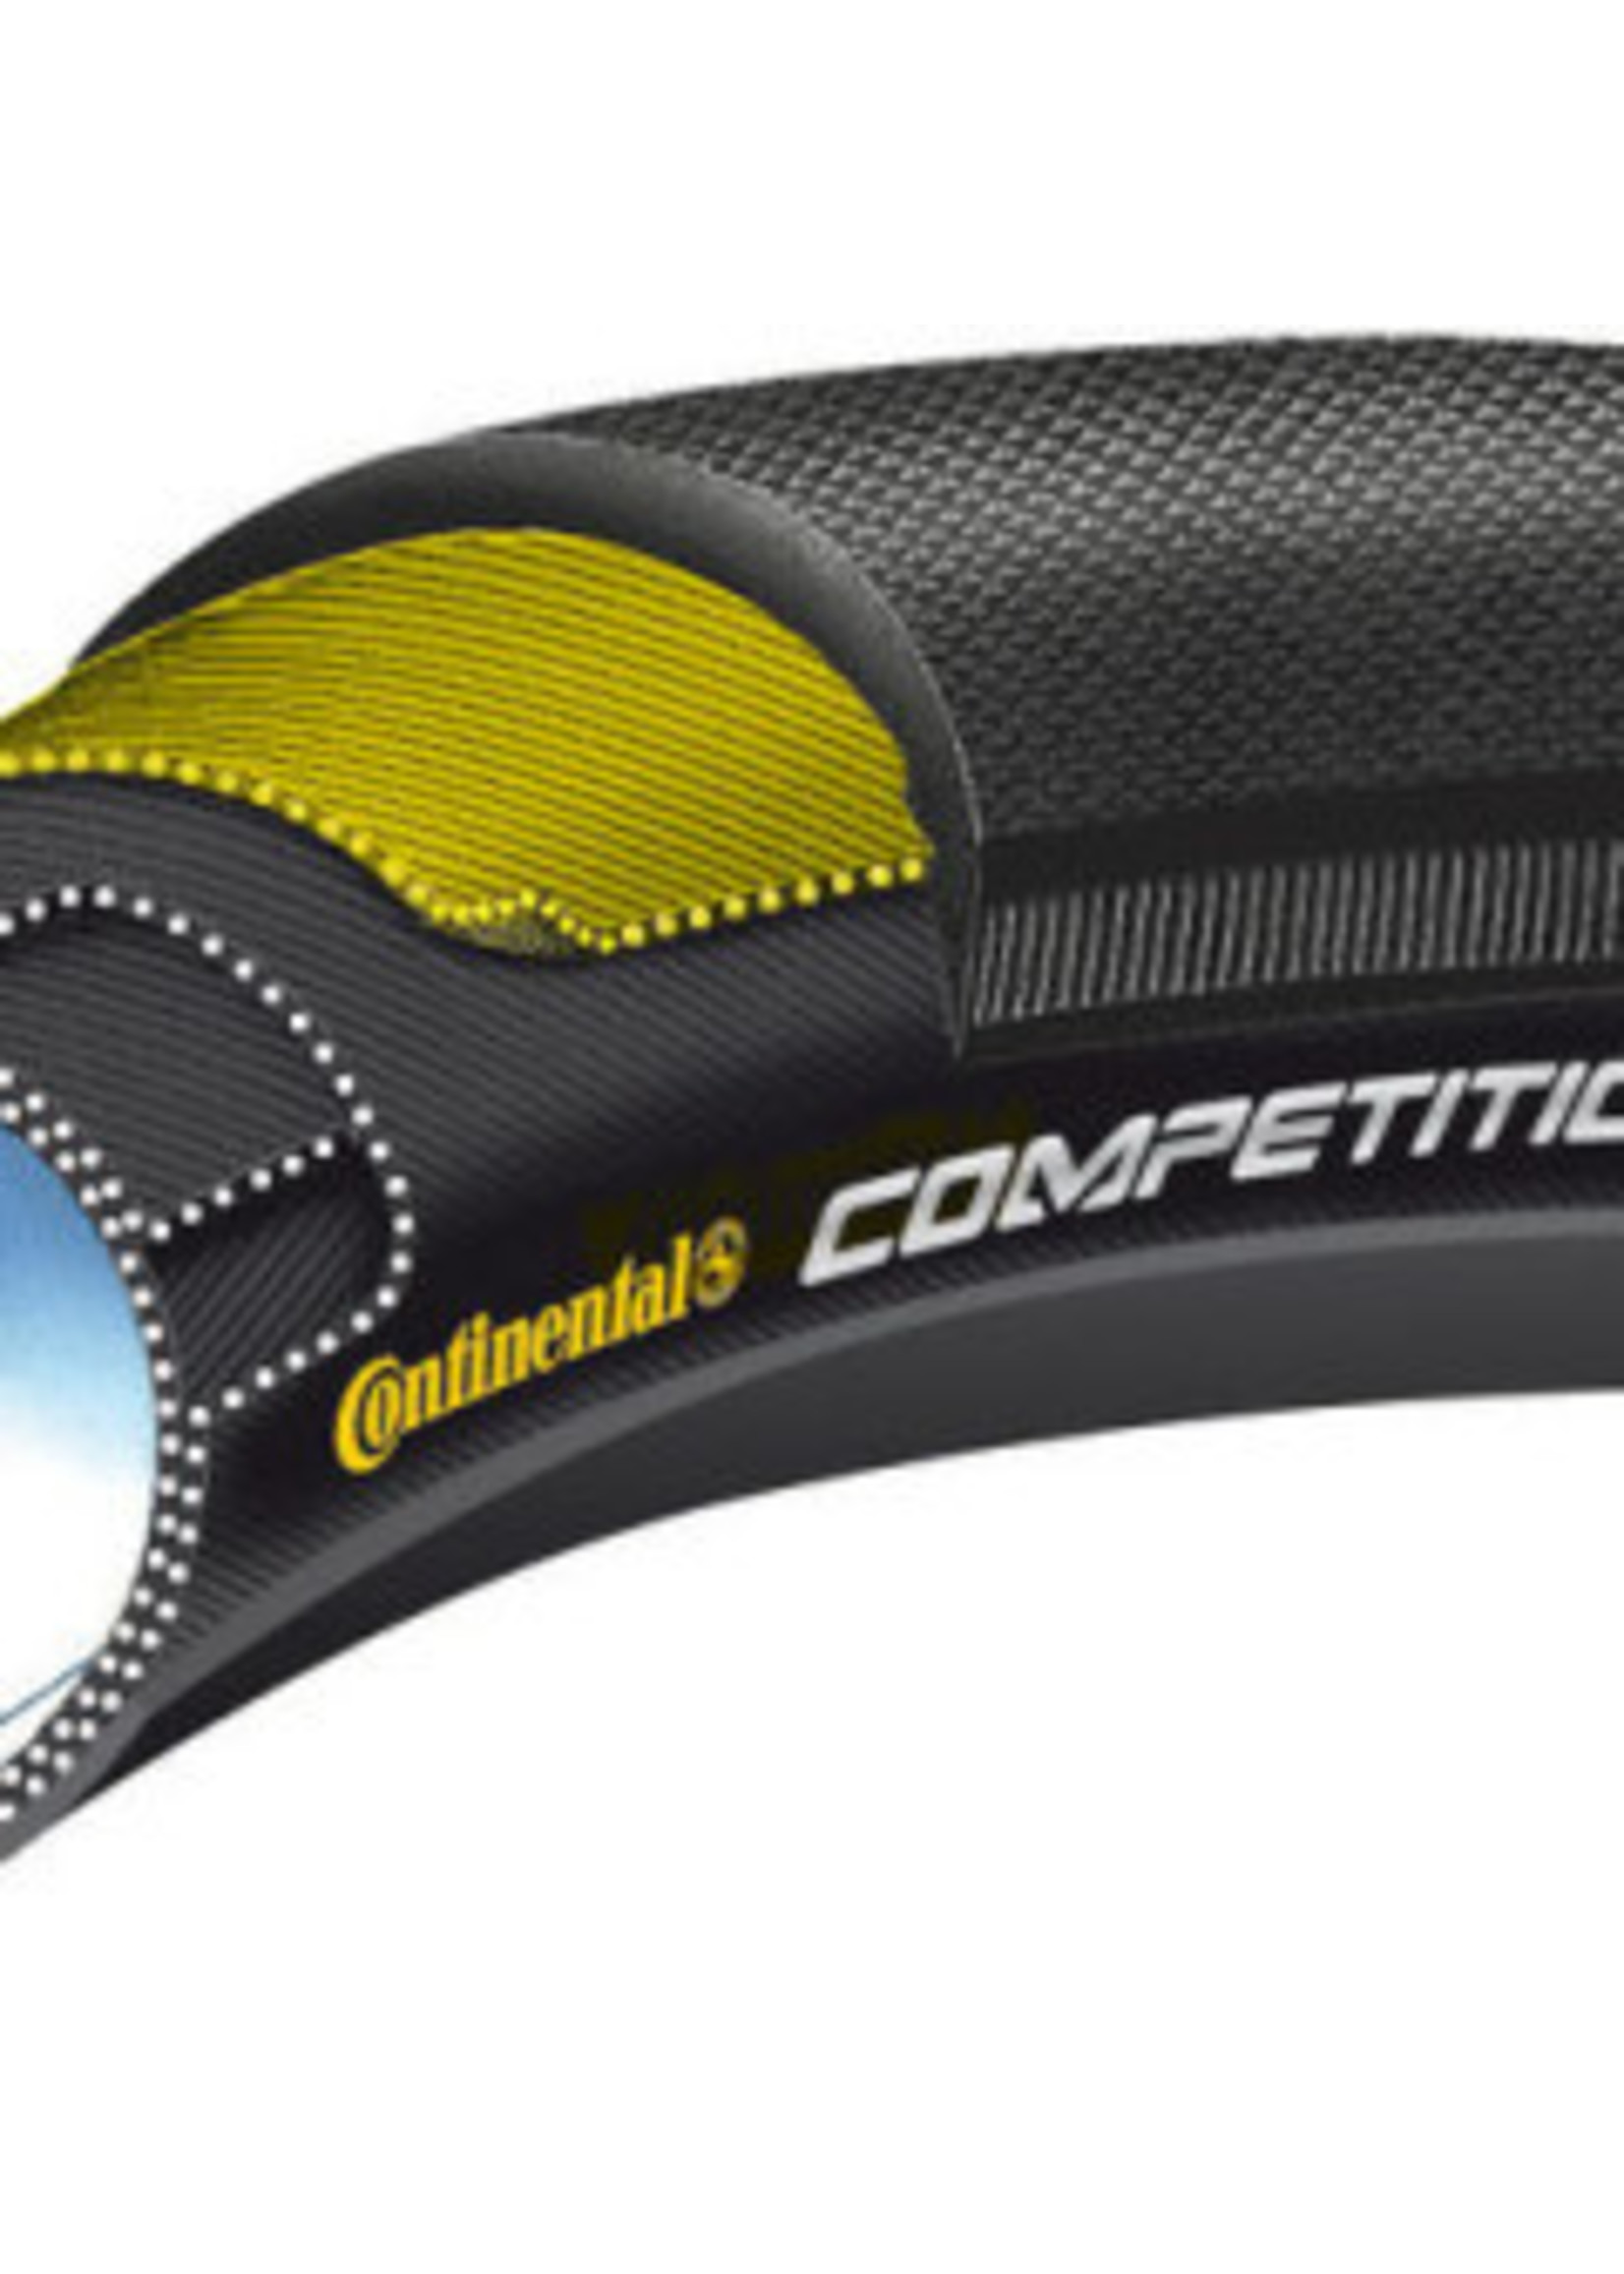 Continental Continental Competition Road Tubulars 26x22